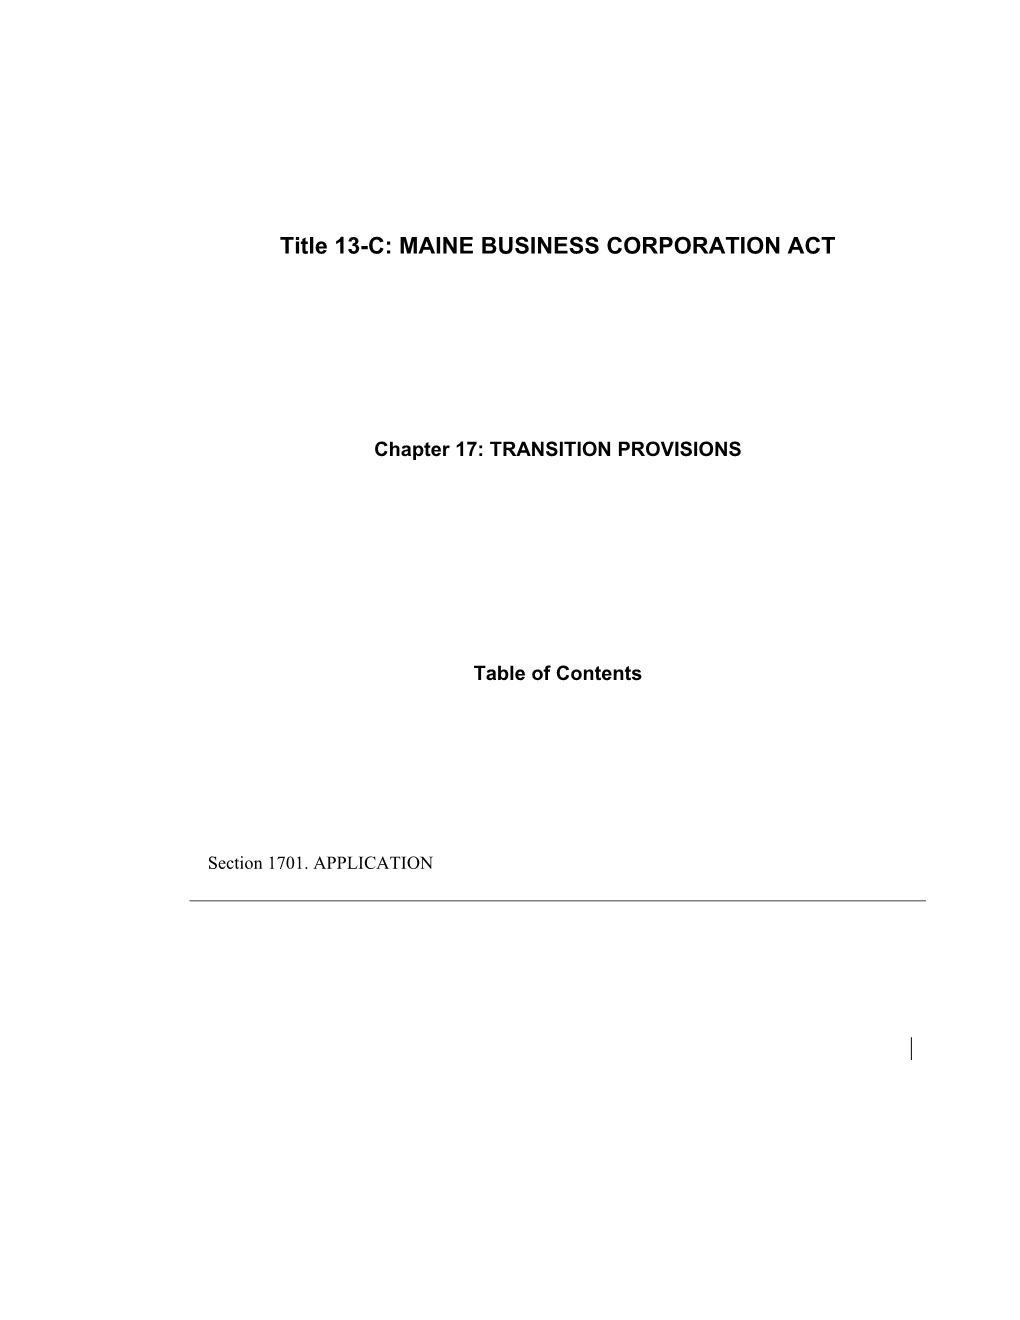 MRS Title 13-C, Chapter17: TRANSITION PROVISIONS